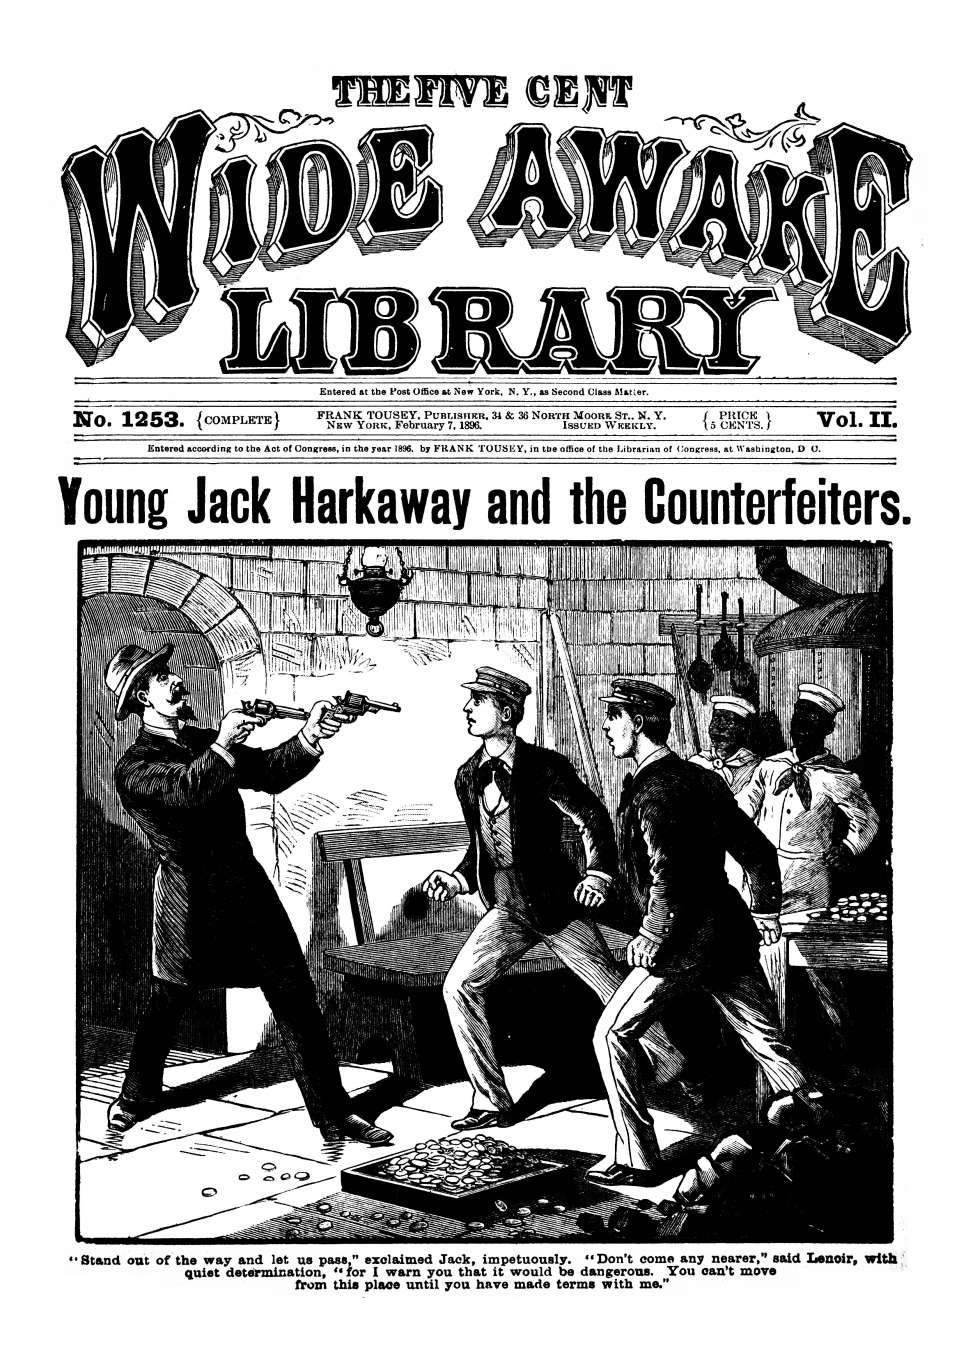 Comic Book Cover For Five Cent Wide Awake Library v2 1253